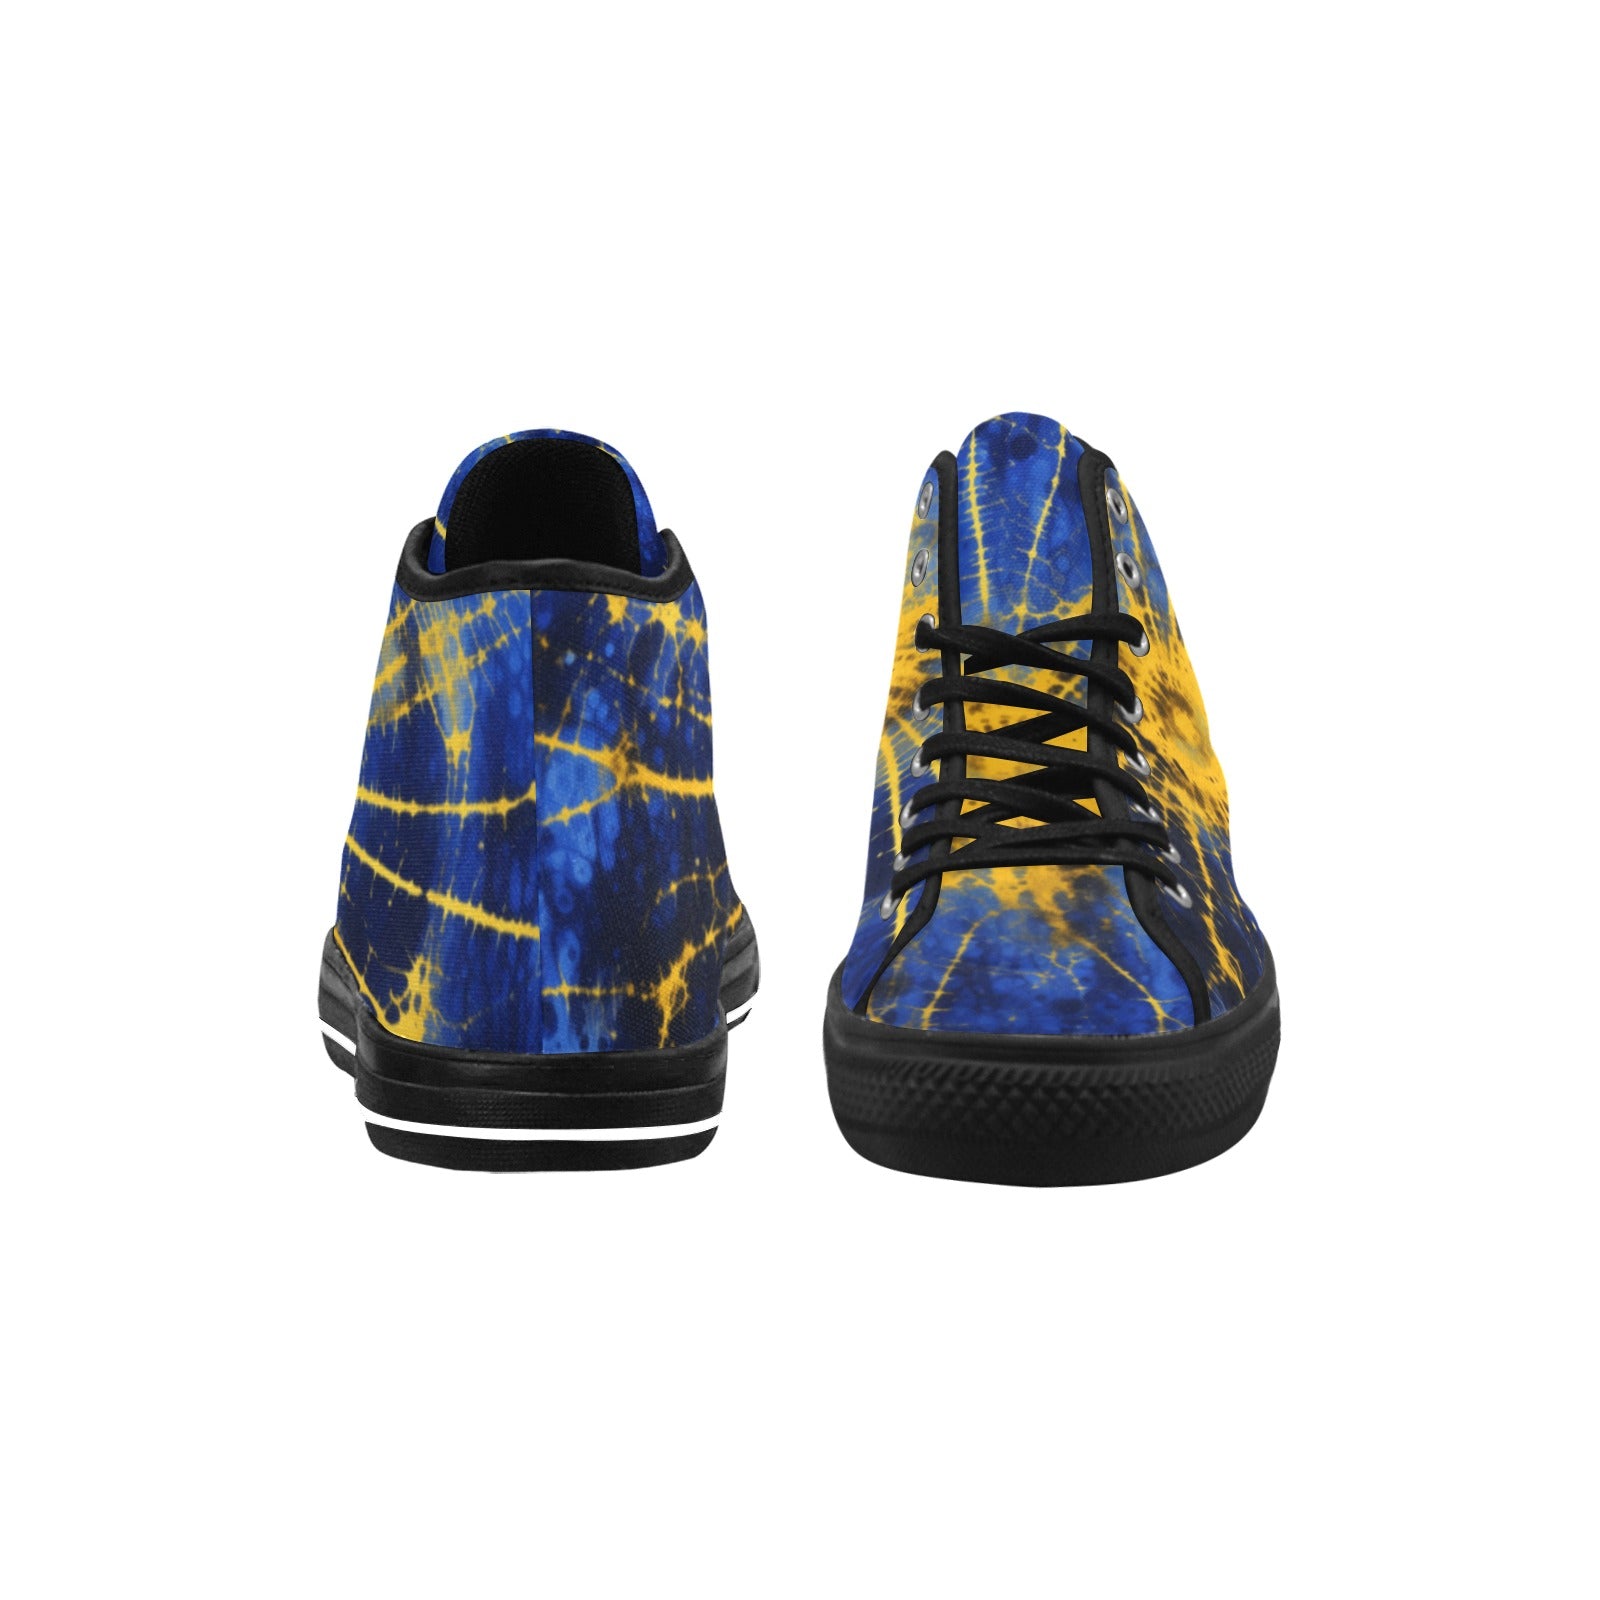 Gold & Blue Tie Dye Hippie Vancouver High Top Canvas Shoes - Women's Sustainable Footwear by Cranberry Lake Designs